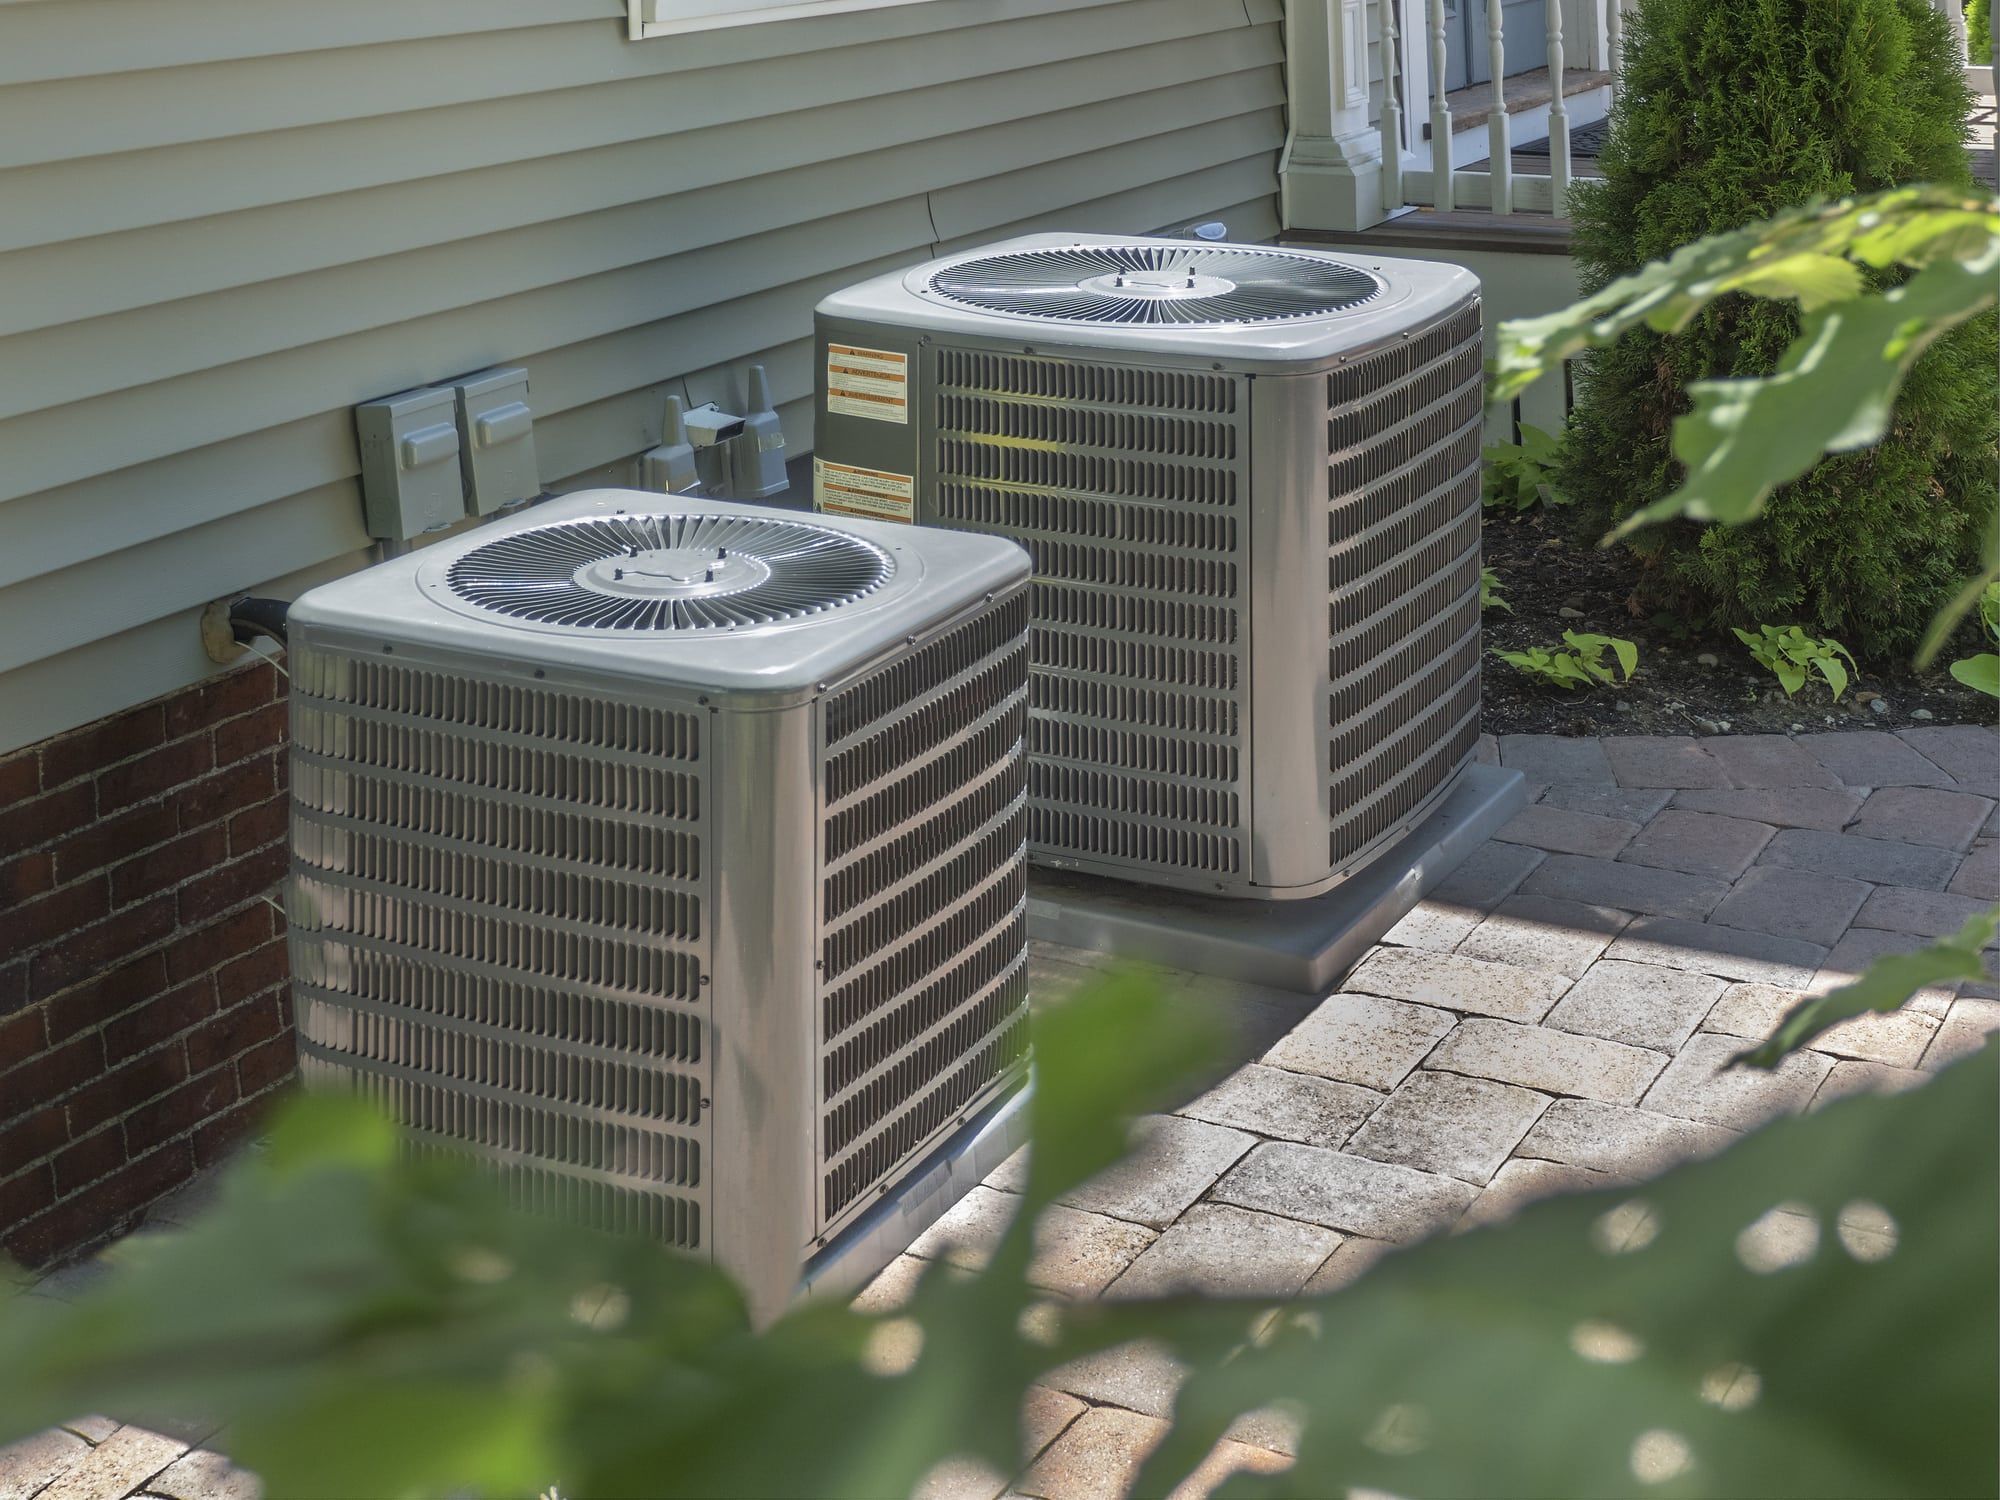 Spring A/C Prep: Important Tips to Get Your Air Conditioner Ready for Warmer Weather